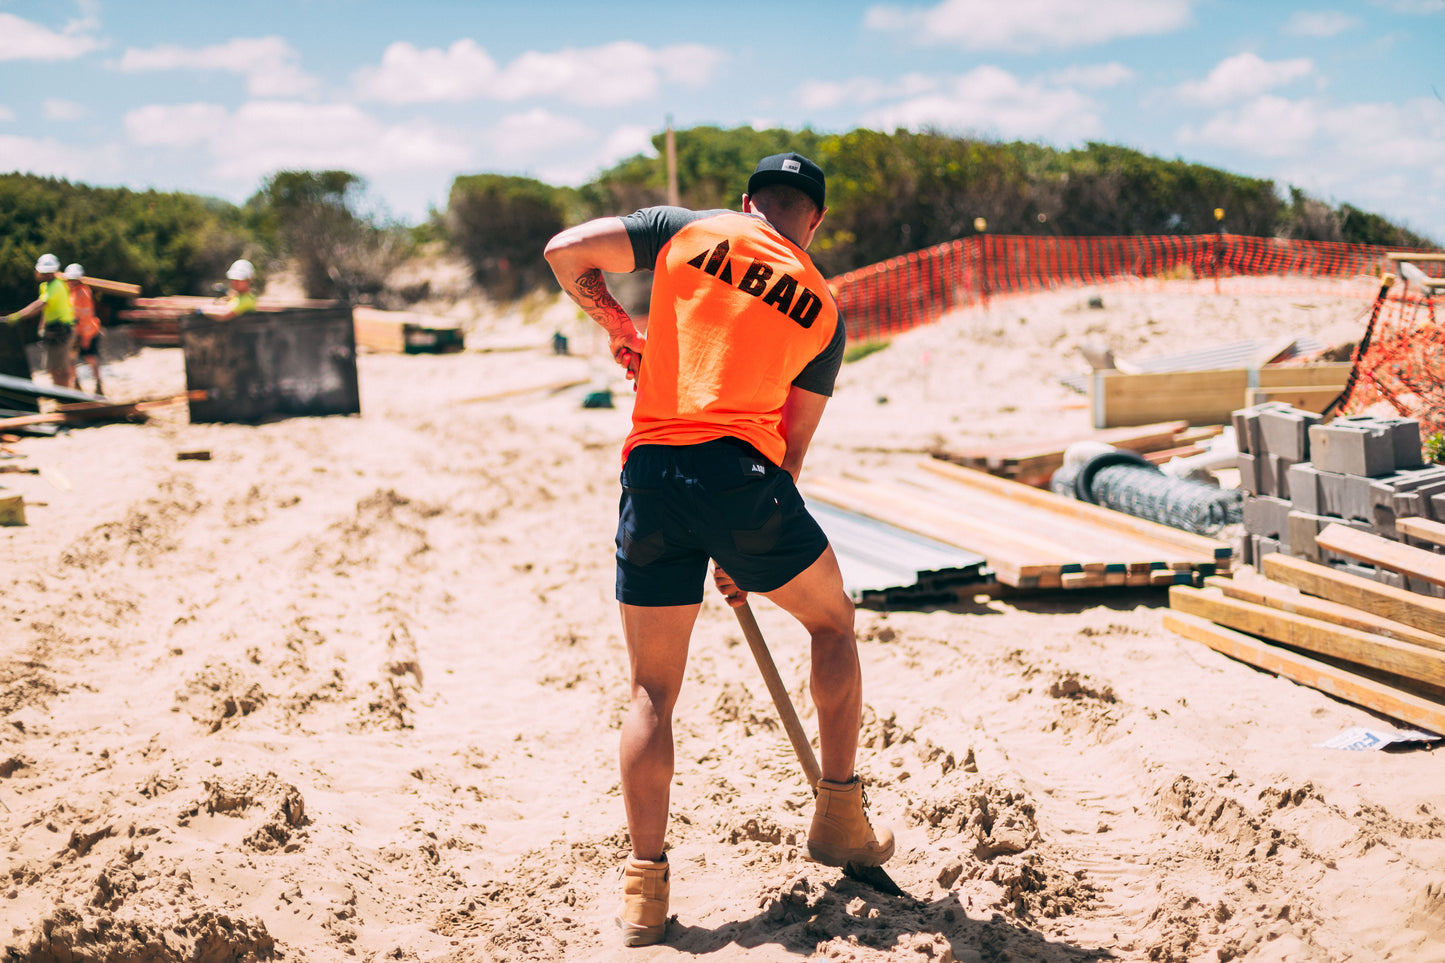 The New Homebuilder Package Is Set To Safeguard Jobs For Millions Of Australian Tradies - How Will This Impact Workwear Suppliers?